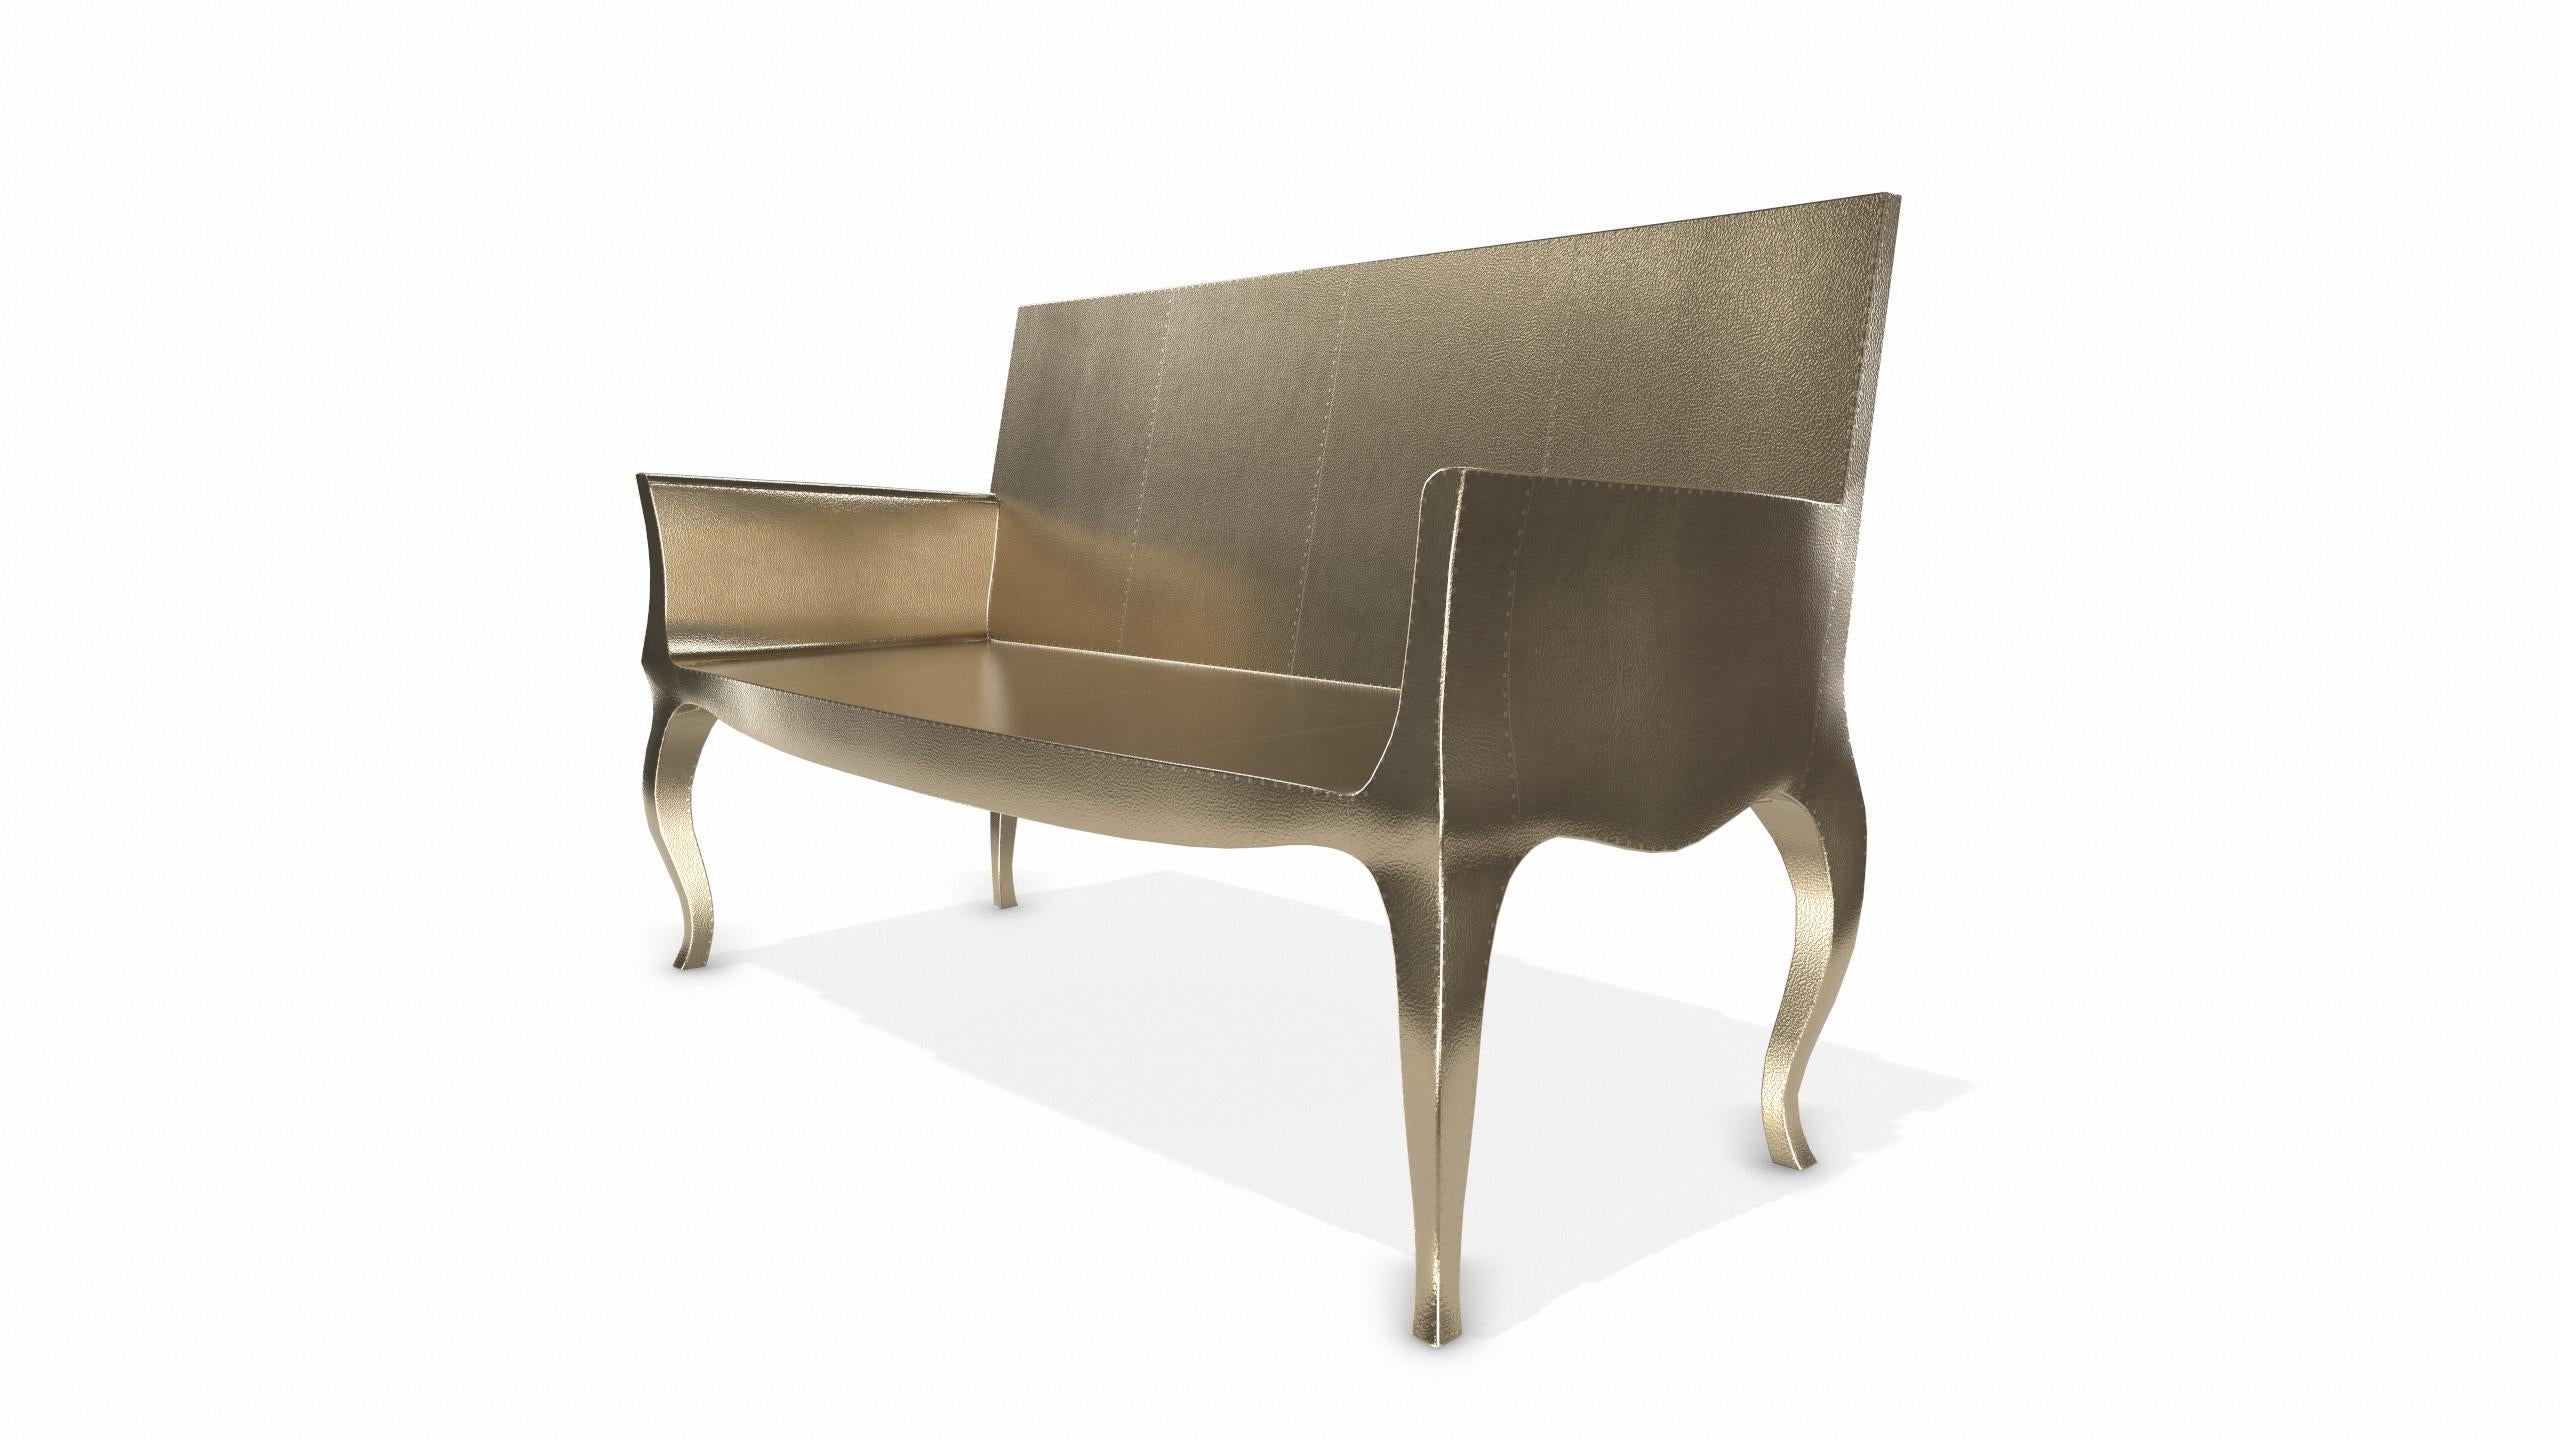 Contemporary Louise Settee Art Deco Daybeds in Fine Hammered Brass by Paul Mathieu For Sale